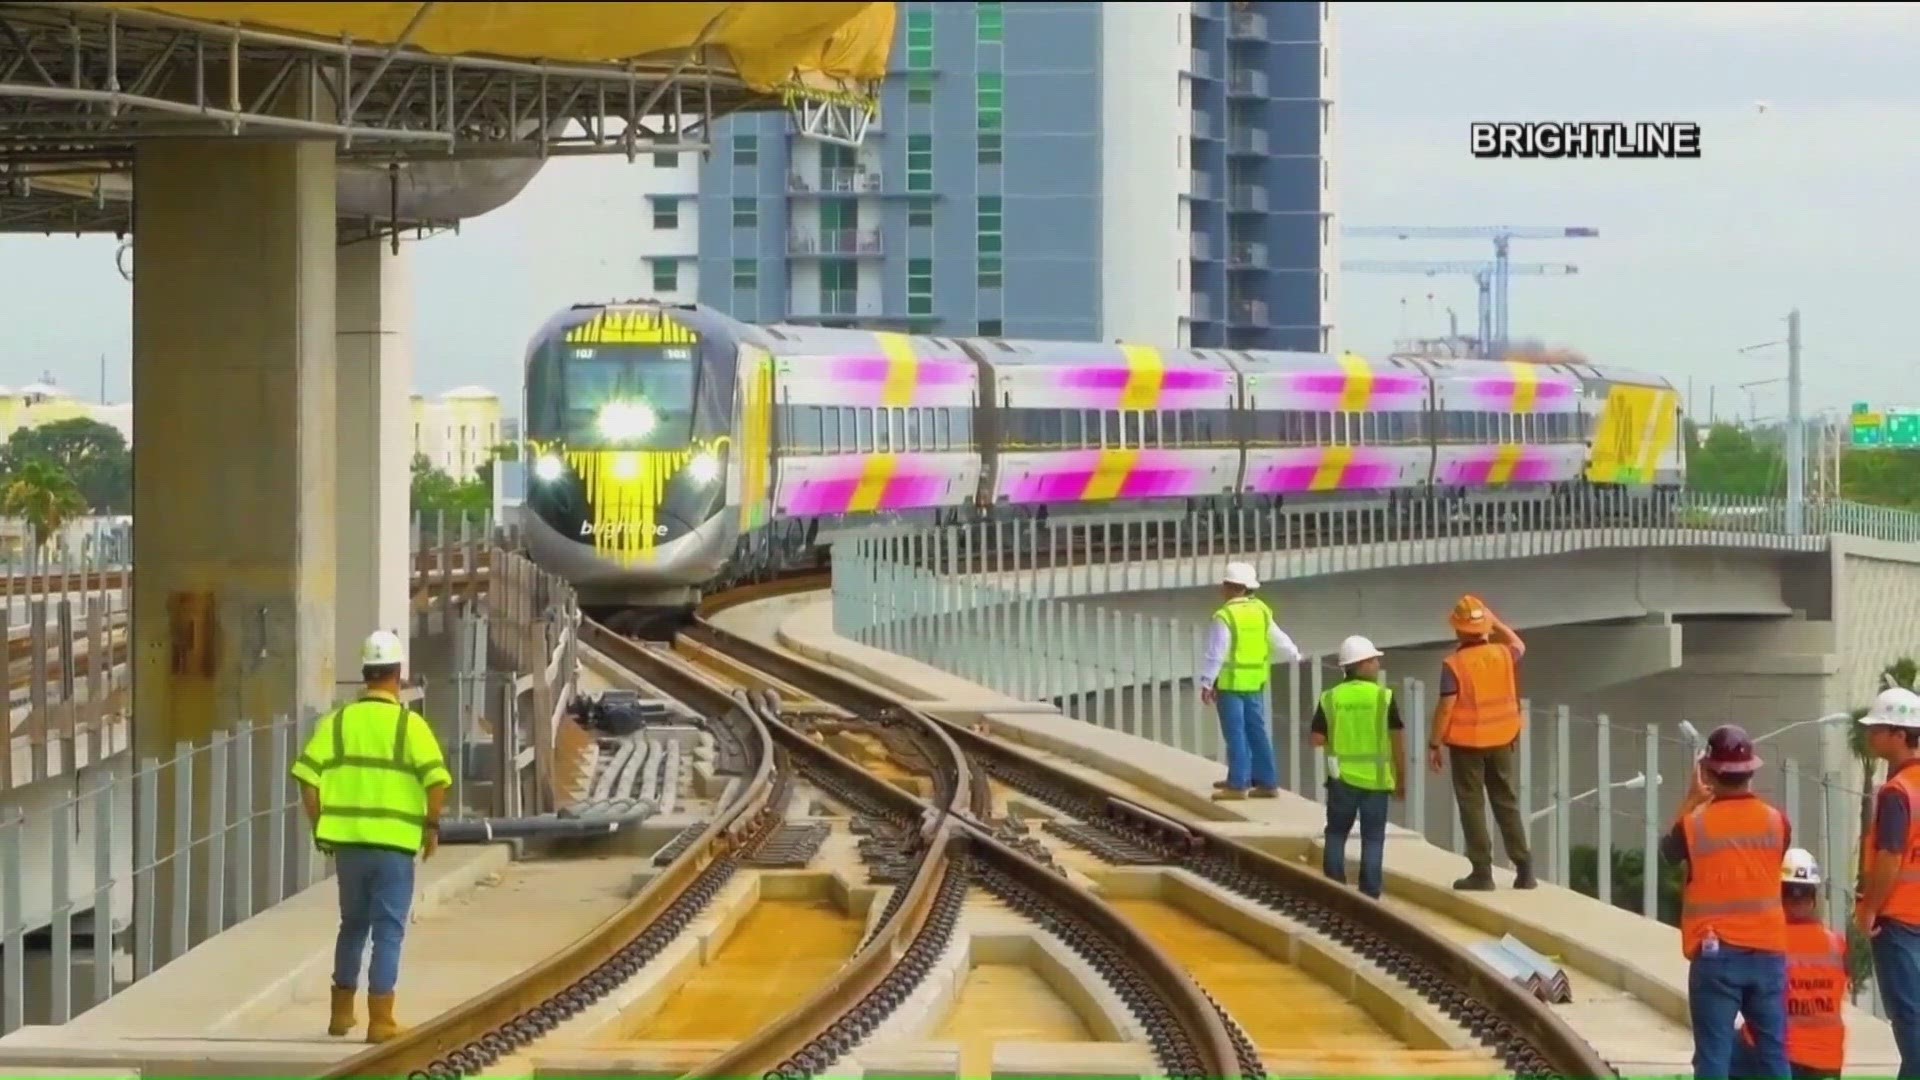 The goal is to have trains operating in time for the Summer Olympics in Los Angeles in 2028.